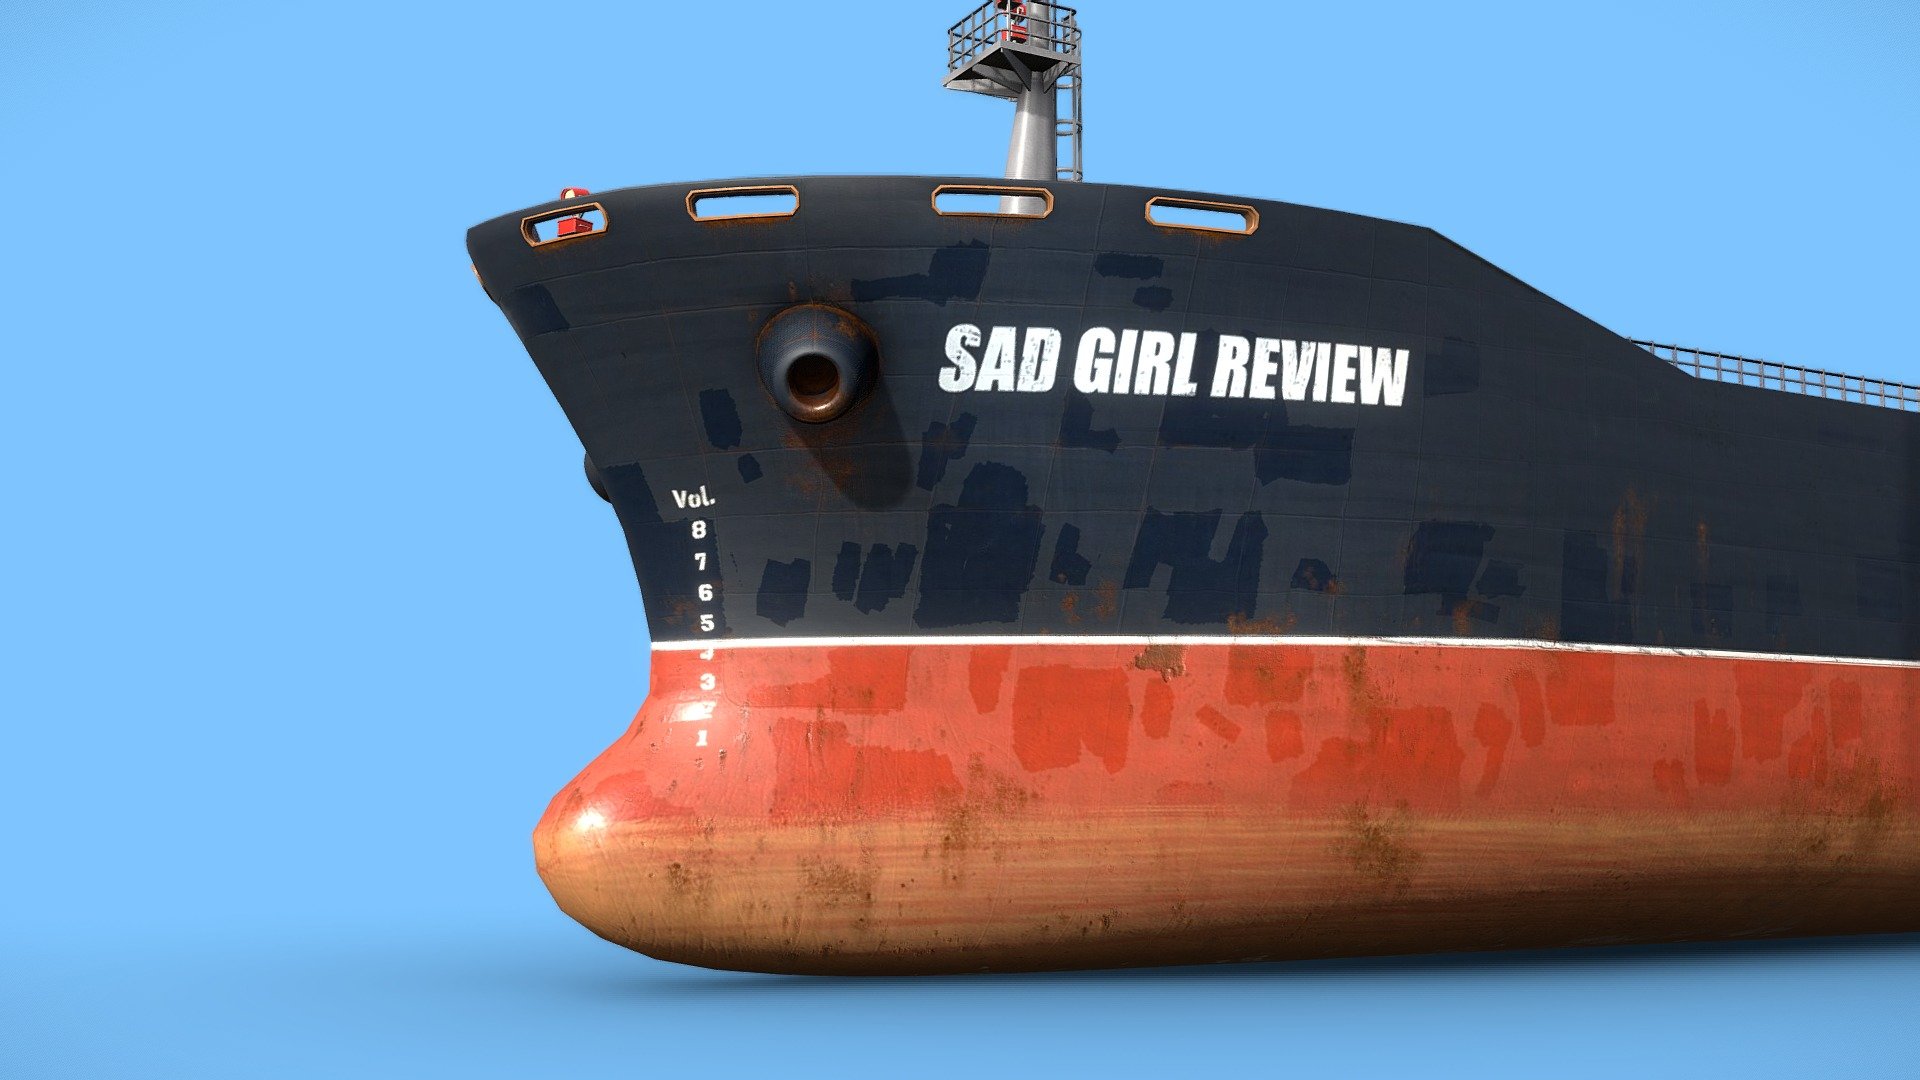 Created for Sad Girl Review Issue 8: Anchor &amp; Root.

“A Cargo ship anchored off the coast of Nanaimo’s downtown district can be considered an eyesore to some, but the ships’ functionality and size has an undeniable aesthetic appeal. On a clear day, you can see dozens of these large vessels parked around the islands on the Salish Sea. All of the things we buy, even the girly things, are shipped to us from far away. Cargo ships can also be seen as symbols of colonialism, supporting destructive resource extraction and shipping goods made with exploitative labour. They serve to remind us that many of us had our “roots” planted here by those who arrived by boat and chose to lower their anchors in unceded lands.”

Model was intended to be viewed from one specific side for a promotional image, which is why the text is flipped on the other side.

Issue 8 of Sad Girl Review: https://sadgirlreview.com/ - Cargo Ship for Sad Girl Review - 3D model by Matthew Fox (@MatthewJFox) 3d model